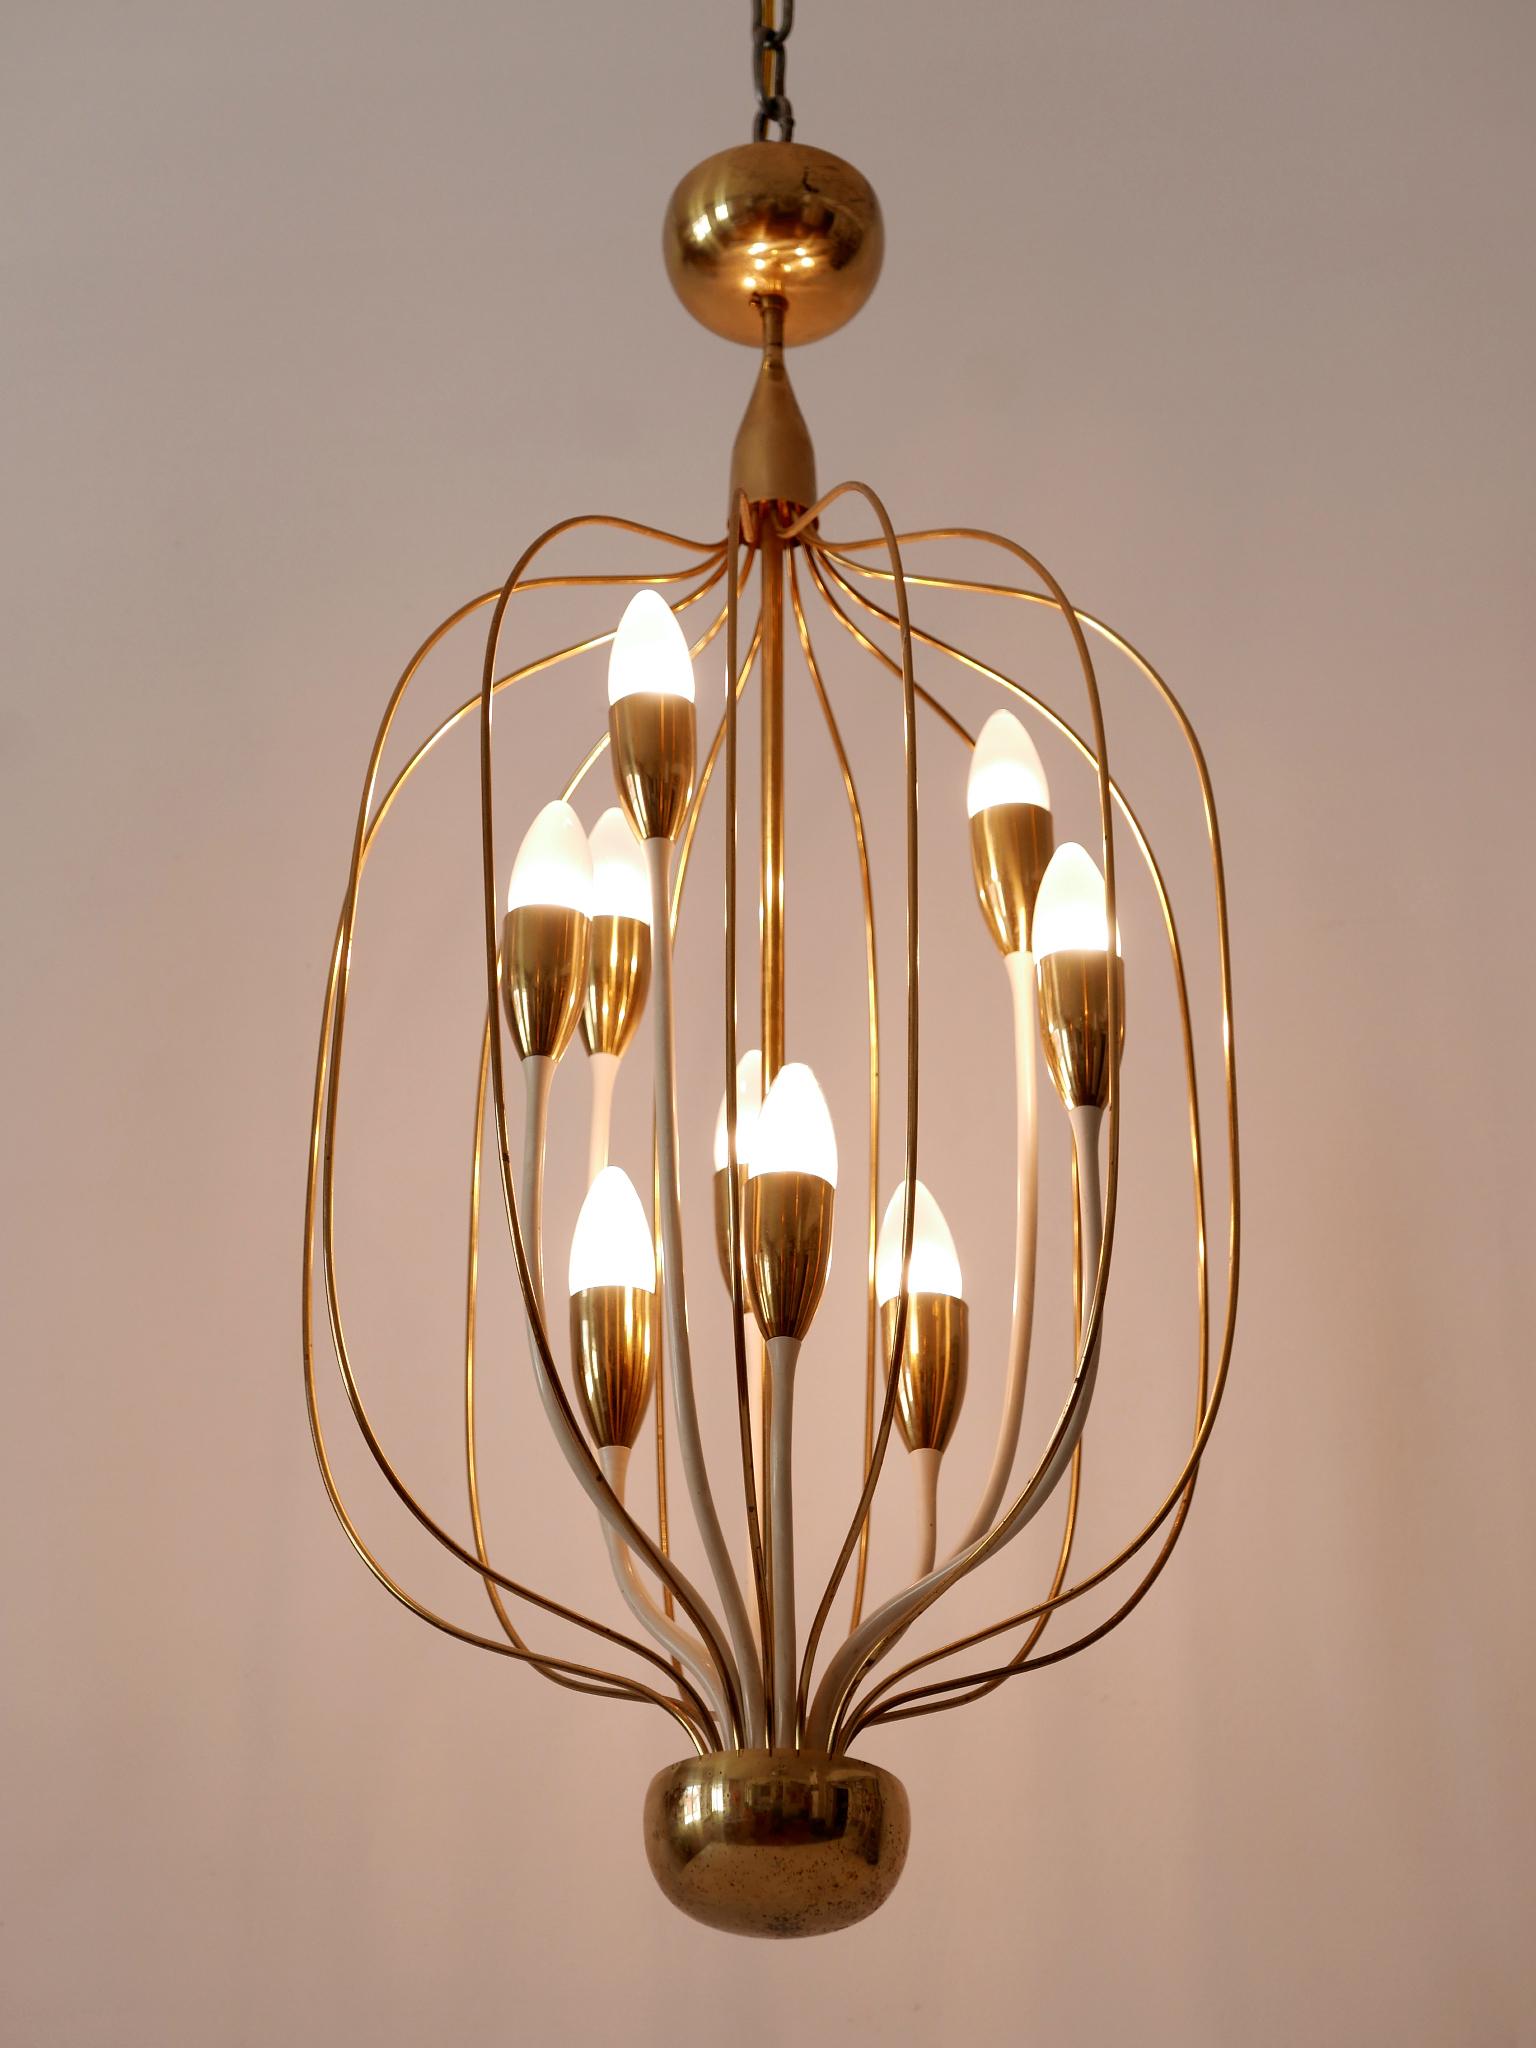 Exceptional Mid-Century Modern Nine-Flamed Chandelier or Pendant Lamp 1950s For Sale 6